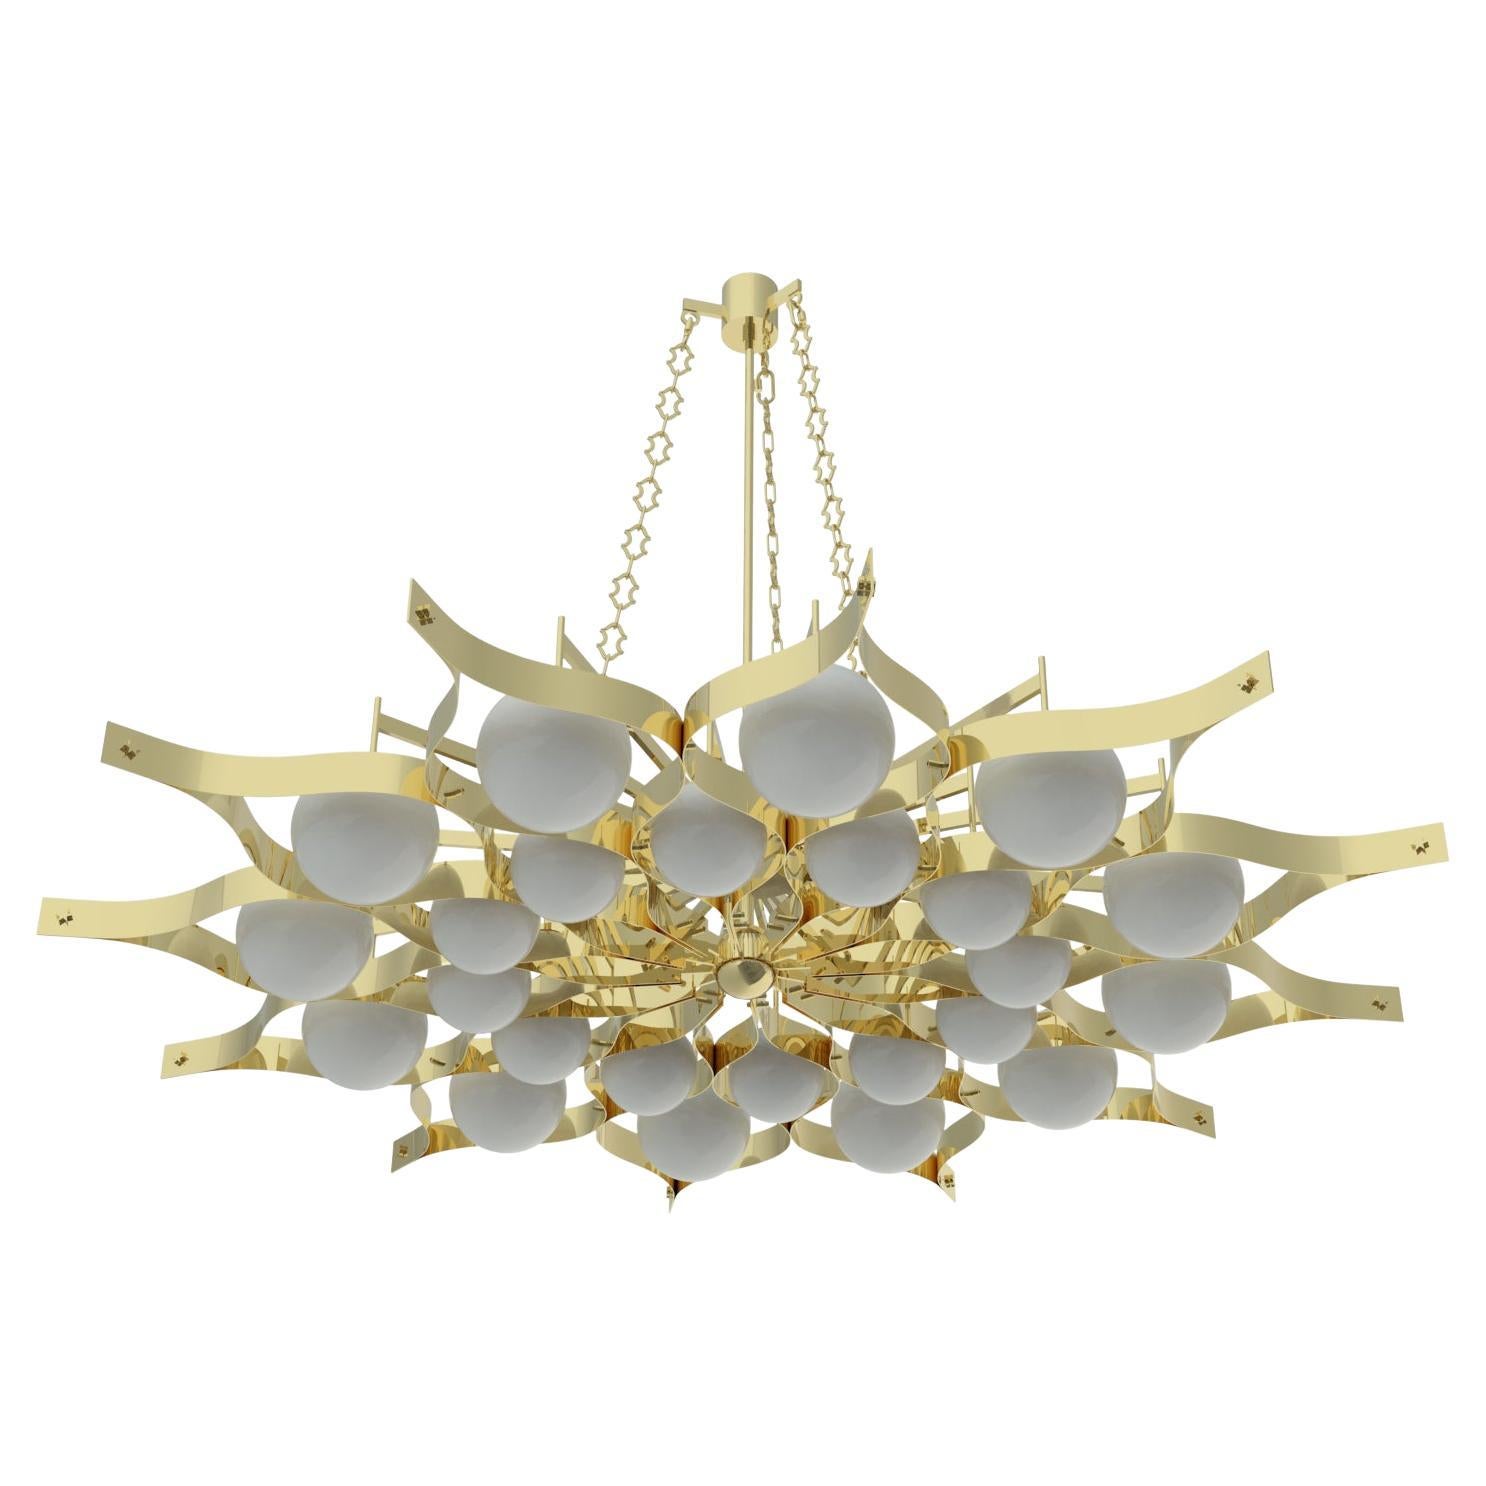 21st Century Pavone Large Pendant Lamp with chains, DALI, Gio Ponti 2019 Italy For Sale